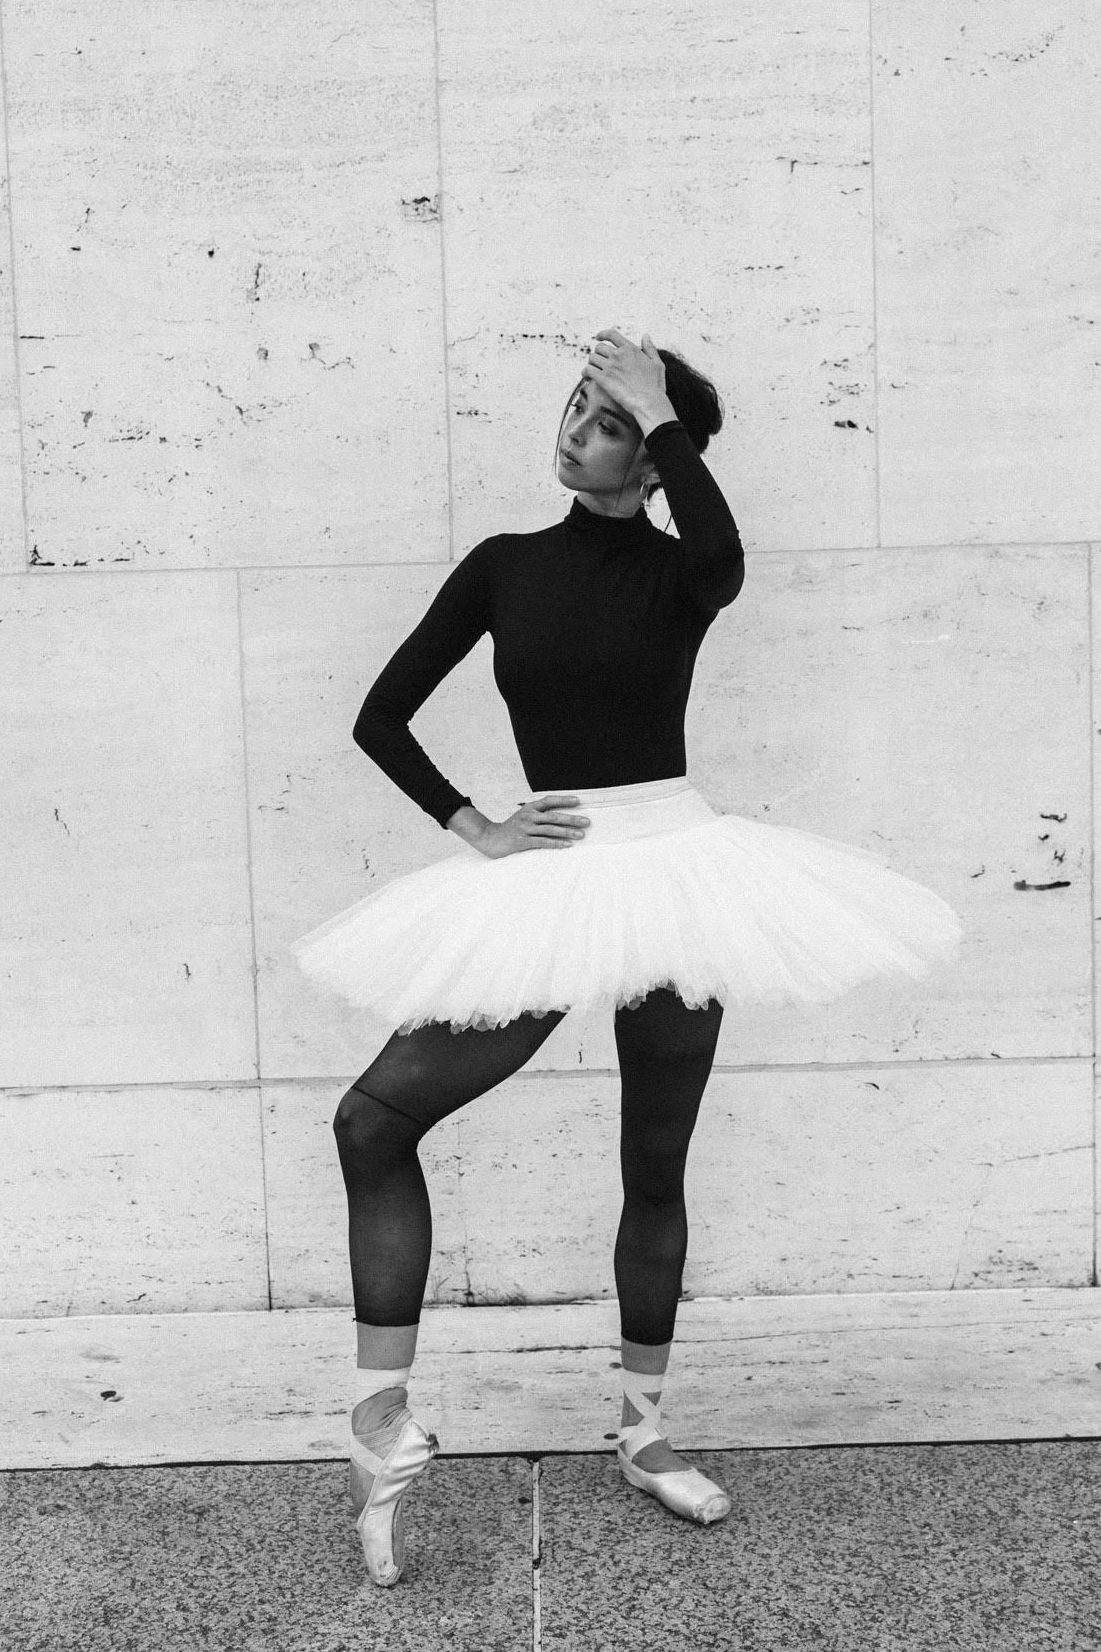 Paulina Waski stands casually outside the Met Theatre in a black and white photograph. She wears a black long-sleeved leotard and cut-off tights, a white practice tutu and pointe shoes. Her dark hair is in a loose bun, and she stands with her right leg slightly propped up on pointe. Her right hand rests on her hip, her left bent up to brush hair away from her face. She looks out contemplatively to the right in front of the white marble wall..